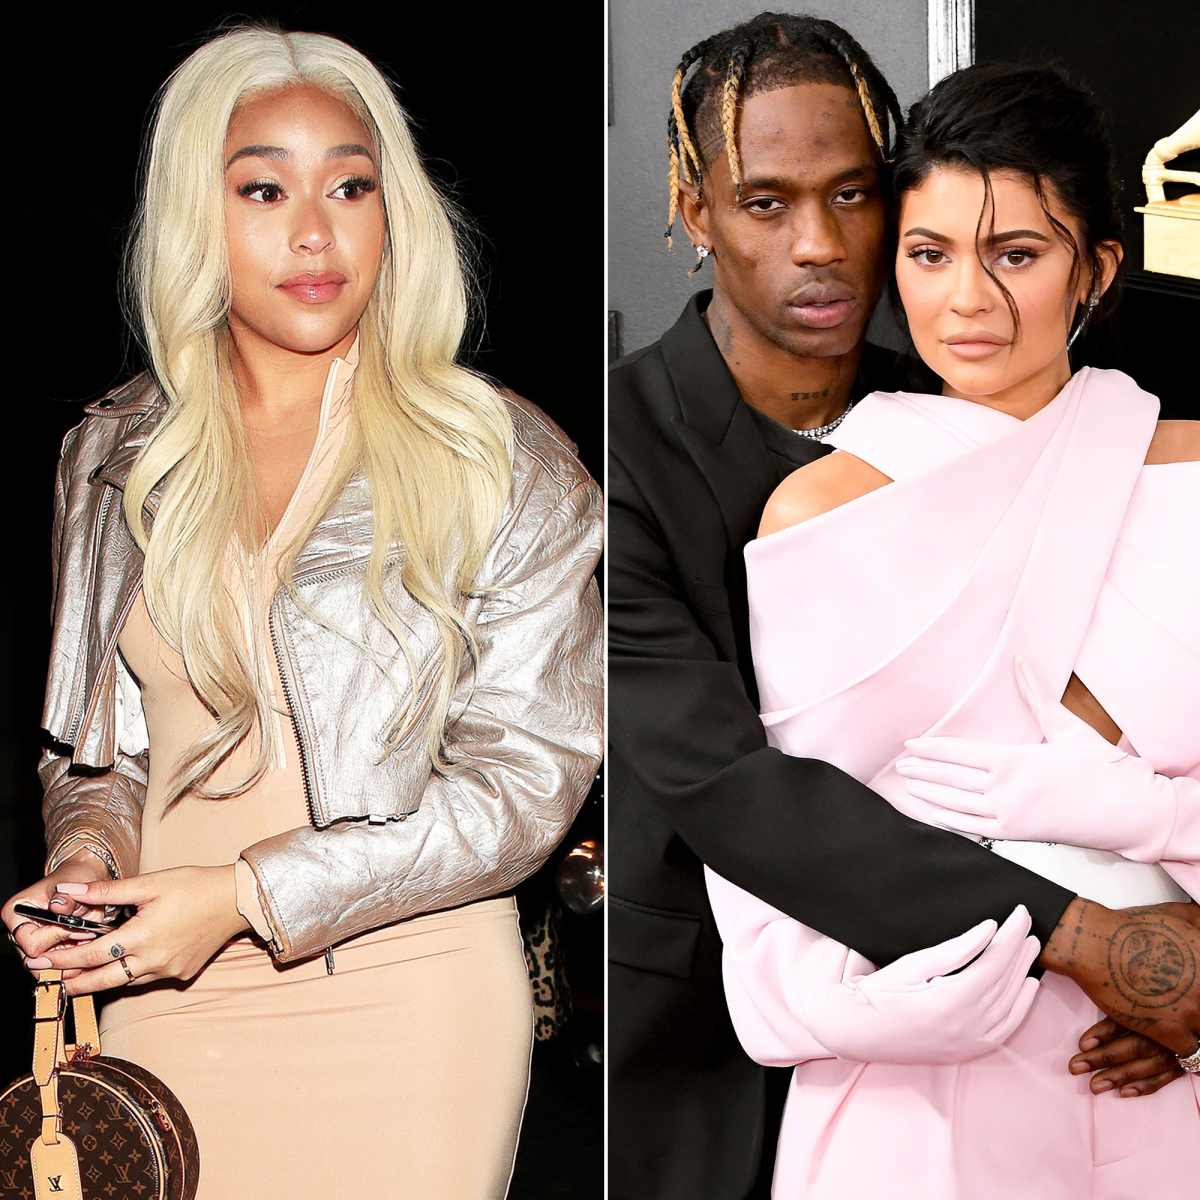 Jordyn Woods booted from Kylie's house following hookup rumour